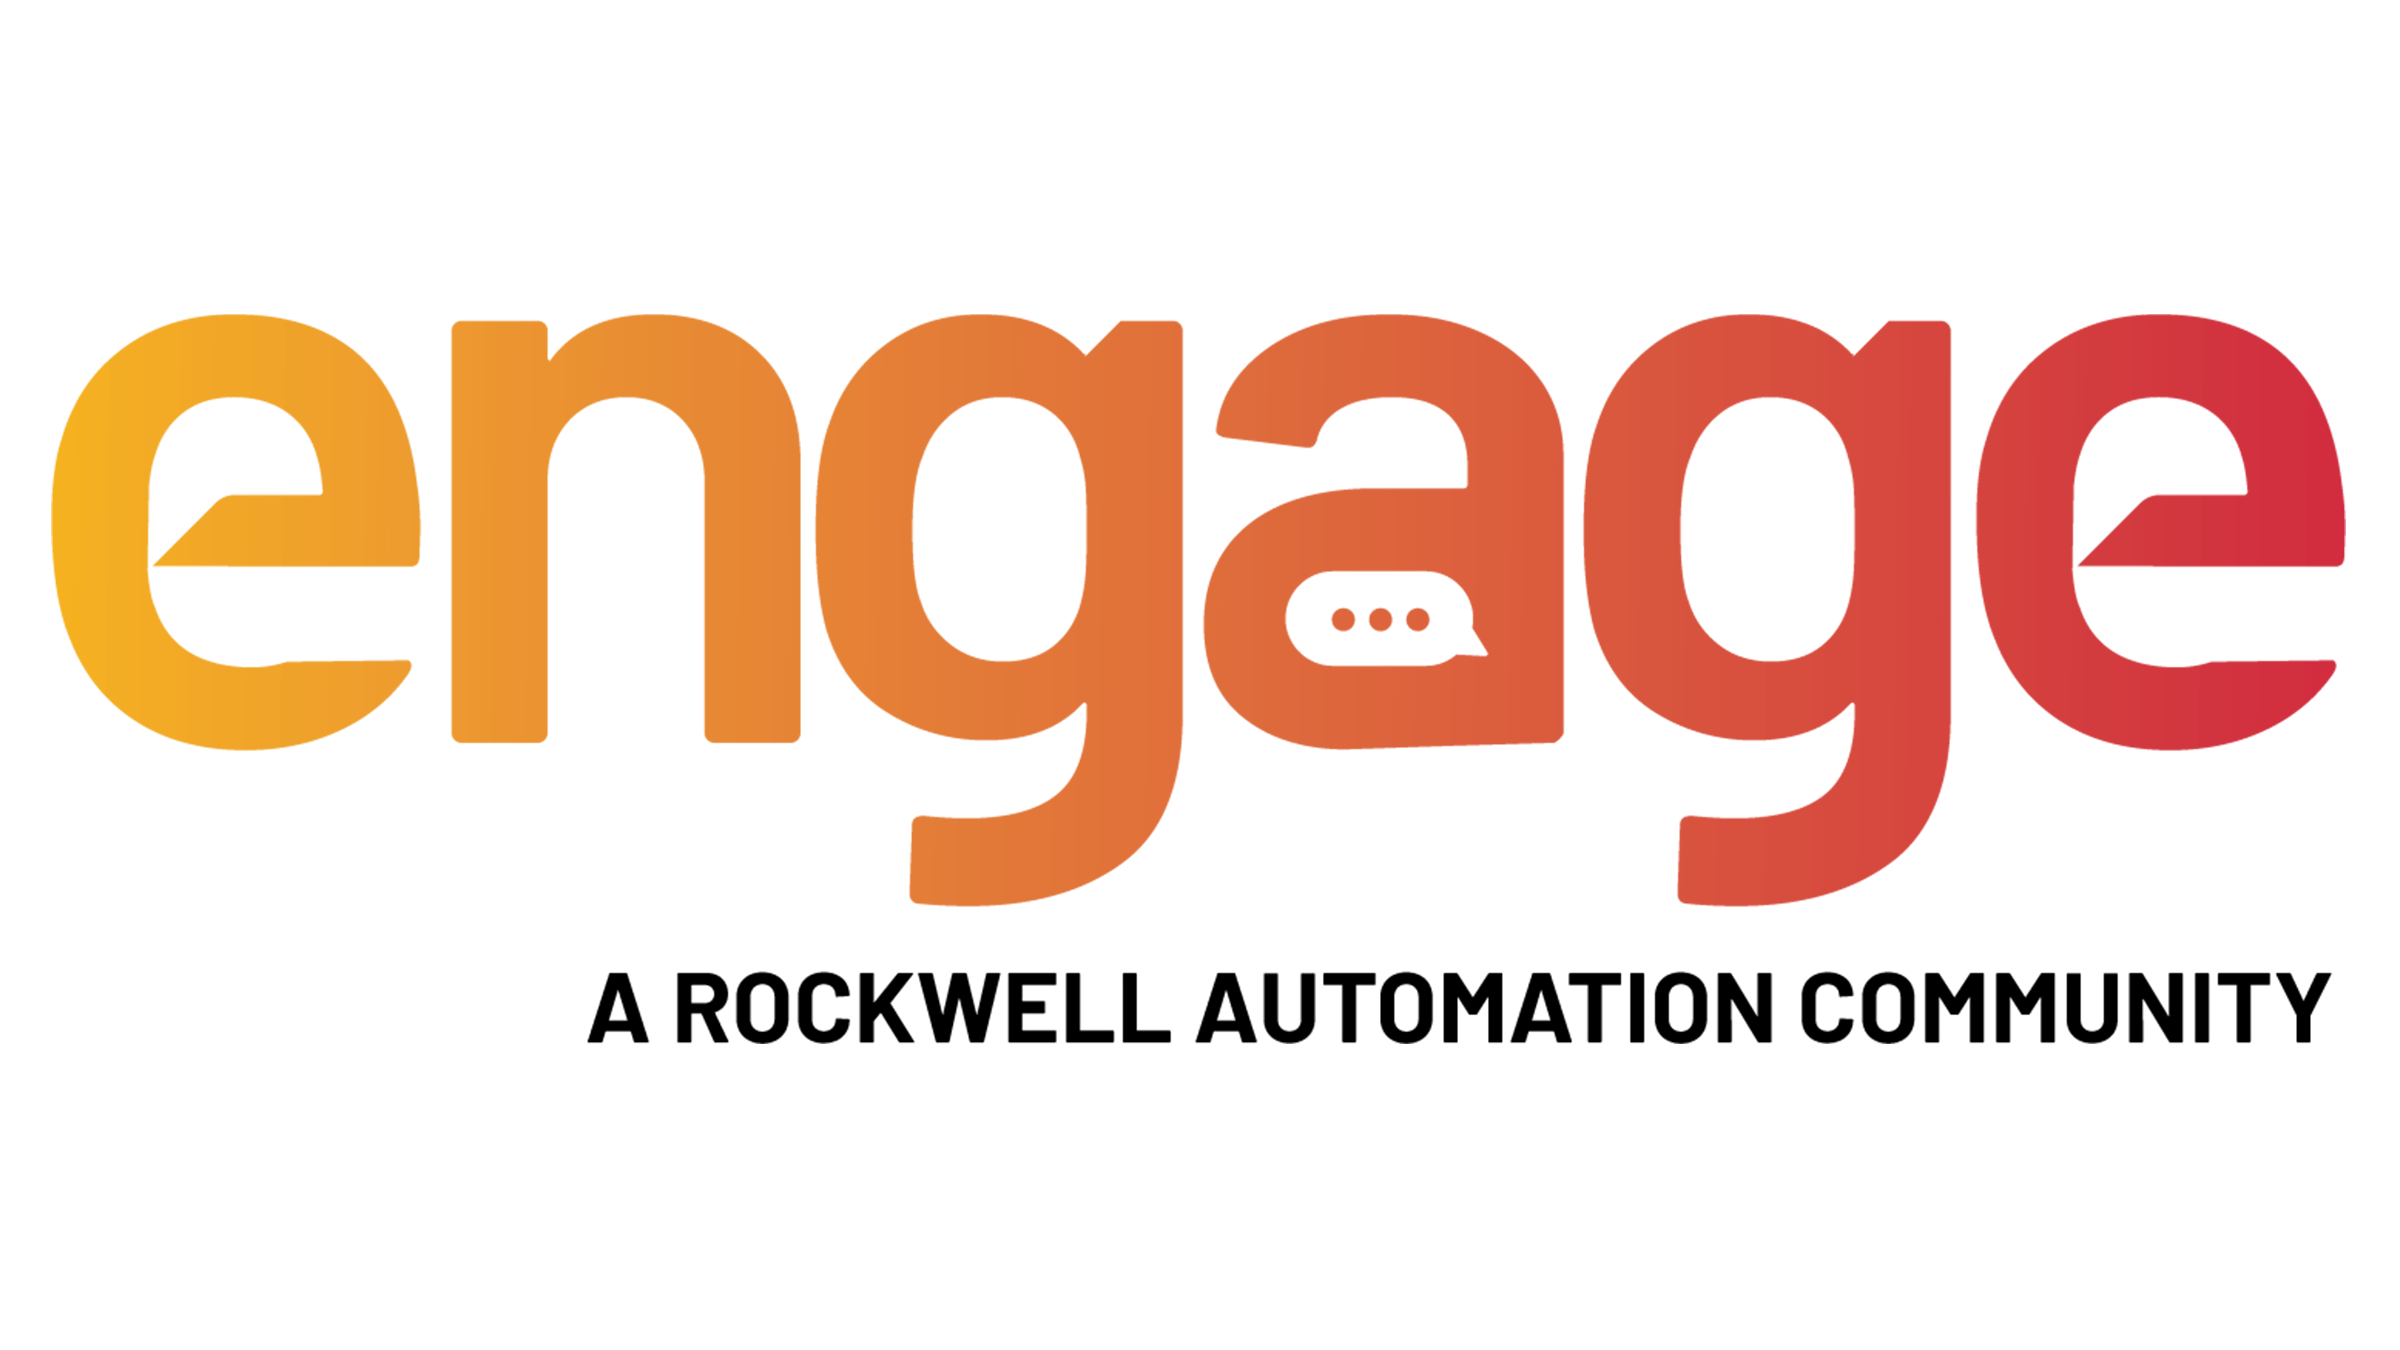 Engage community logo in color followed by text that states a Rockwell Automation community.